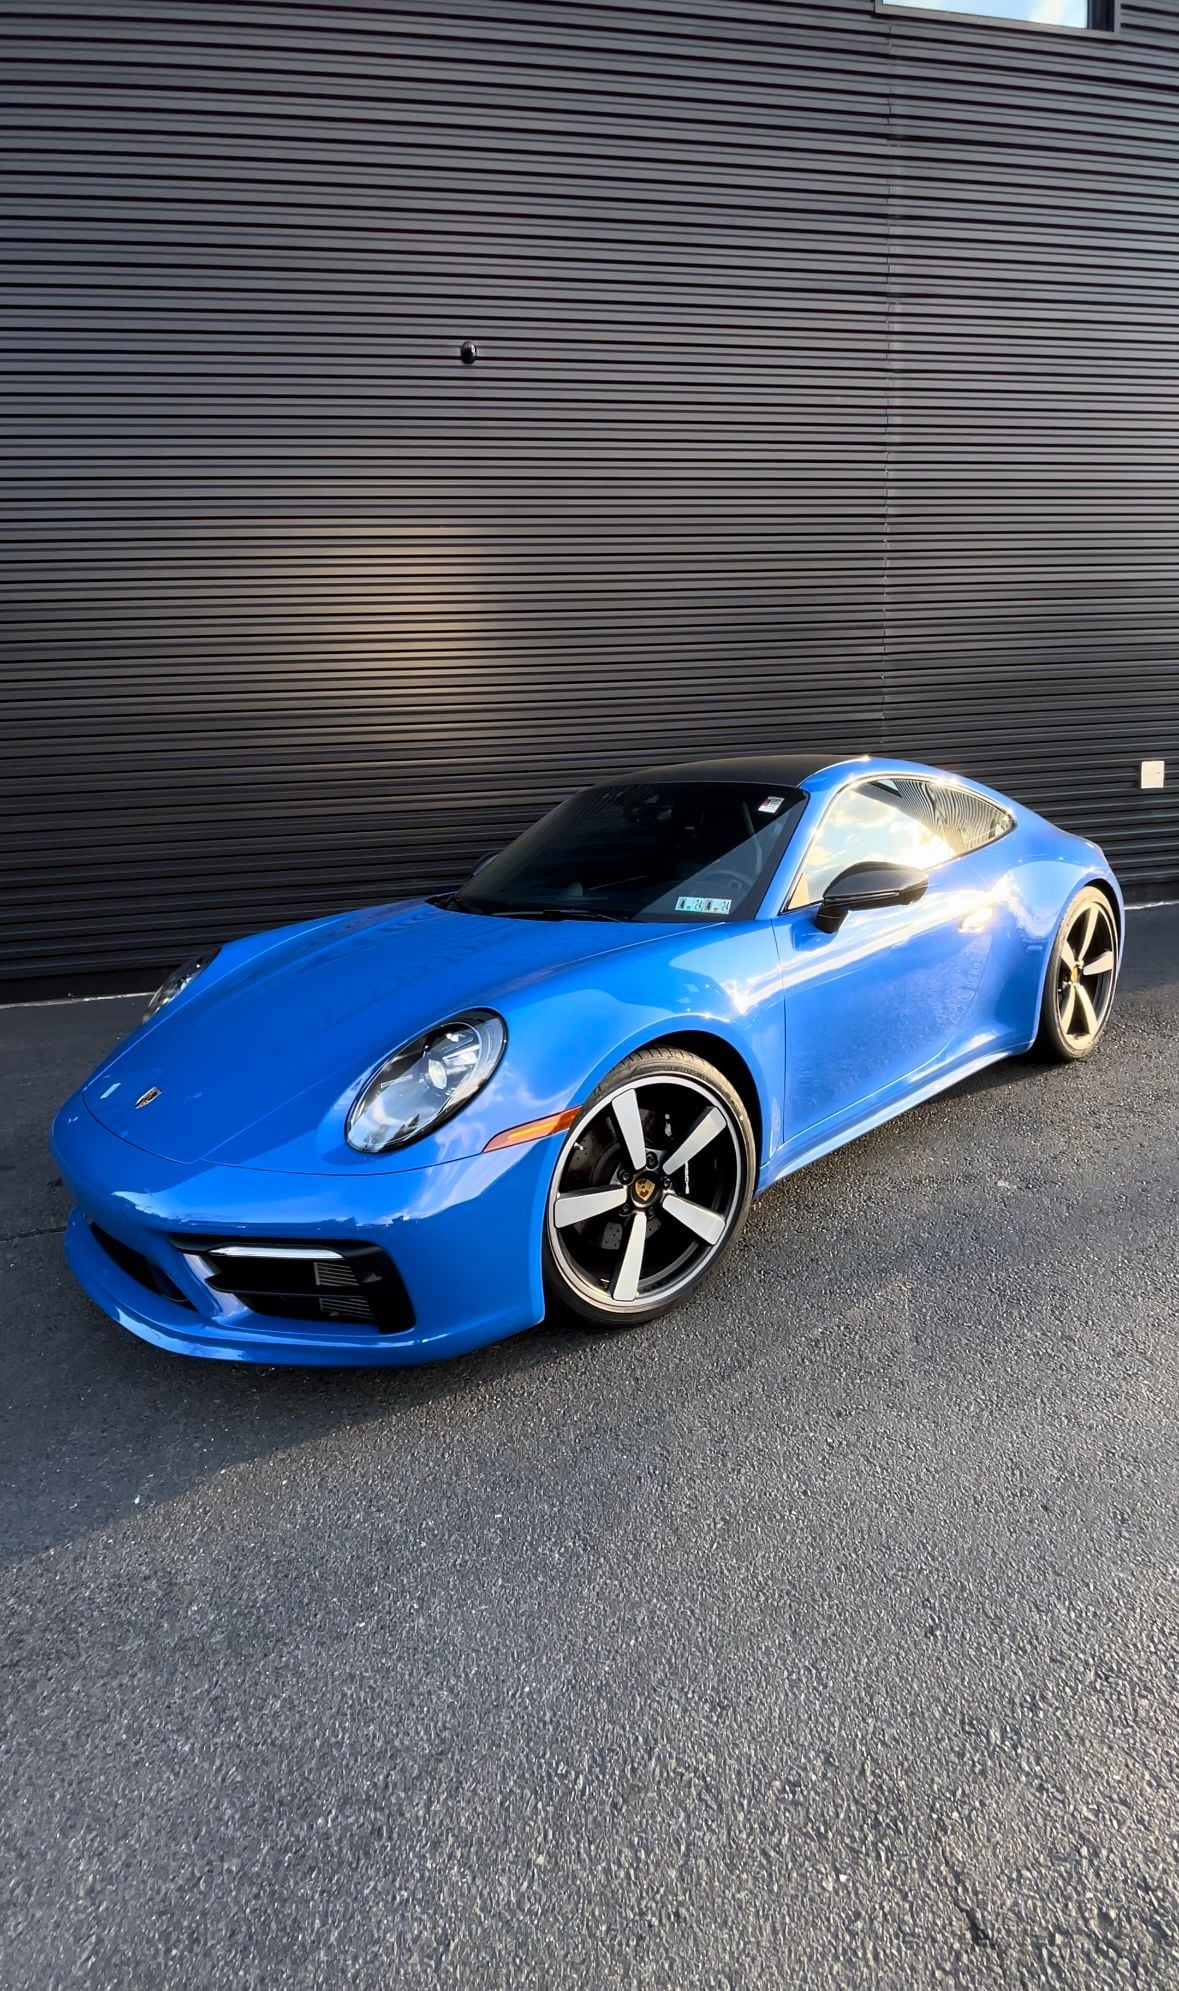 2021 Porsche 911 - Certified Pre-Owned 2021 Porsche 911 Carrera S  *PTS* Club Blau Manual - Used - VIN WP0AB2A95MS221546 - 3,155 Miles - 6 cyl - 2WD - Manual - Coupe - Blue - Lawrenceville, NJ 08648, United States